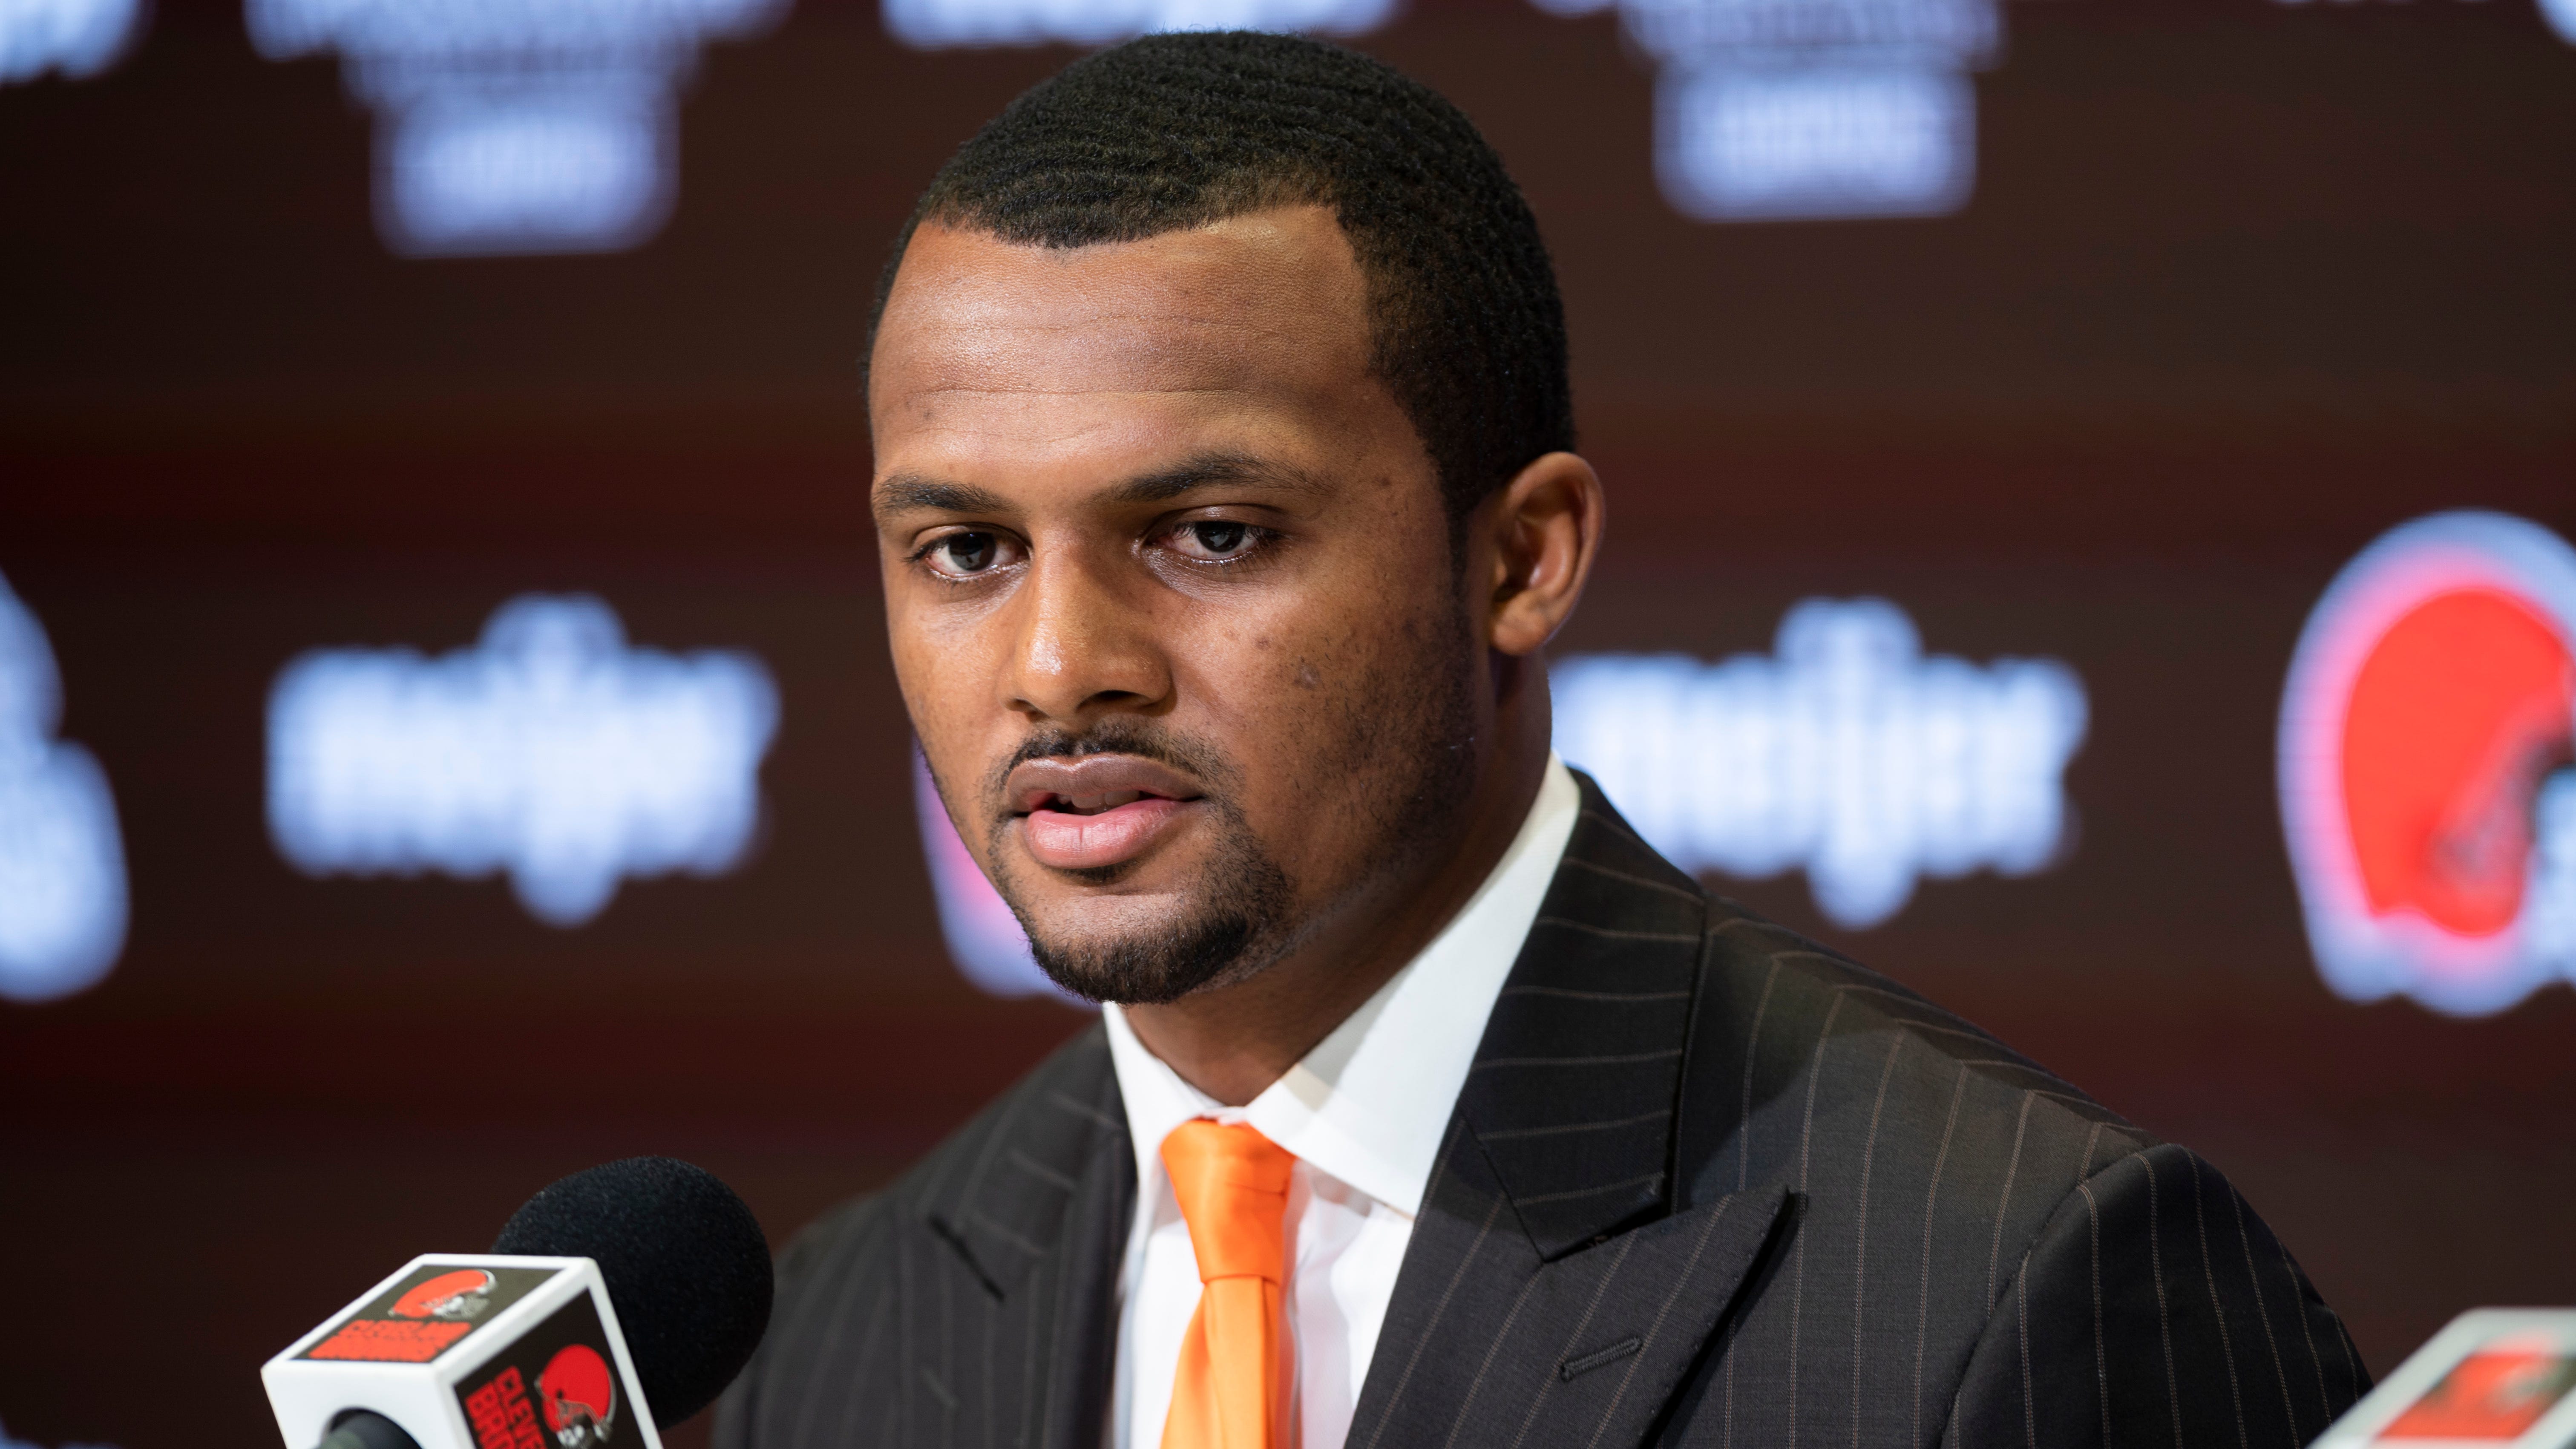 Deshaun Watson talks with the media during his Cleveland Browns introductory press conference.